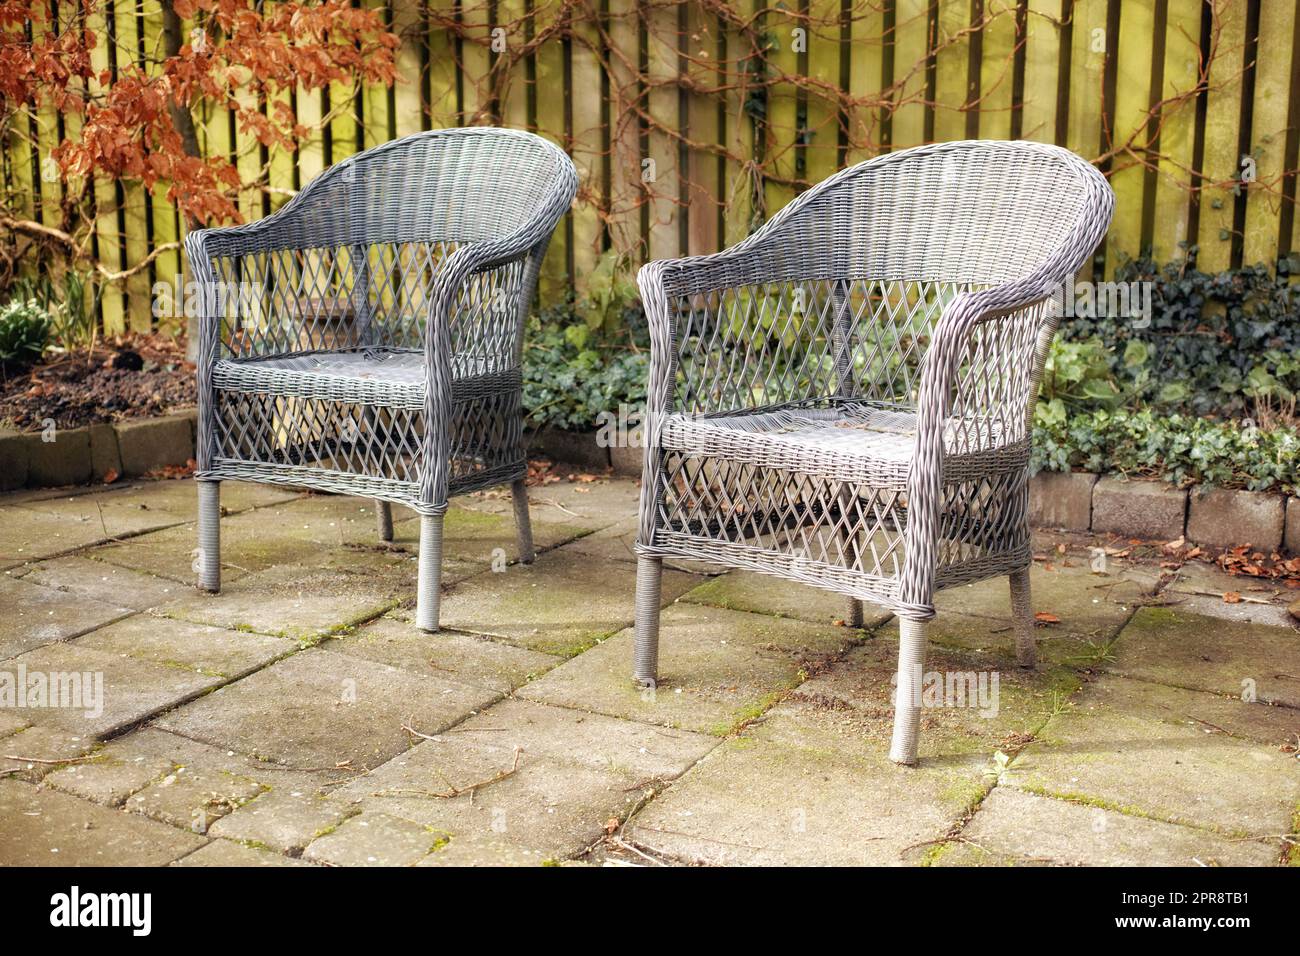 Armchairs in a relaxing garden space in a backyard of a home. Decorative outdoor furniture or woven chairs near ornamental plants. Gardening decor outside of the house on a patio in the yard Stock Photo